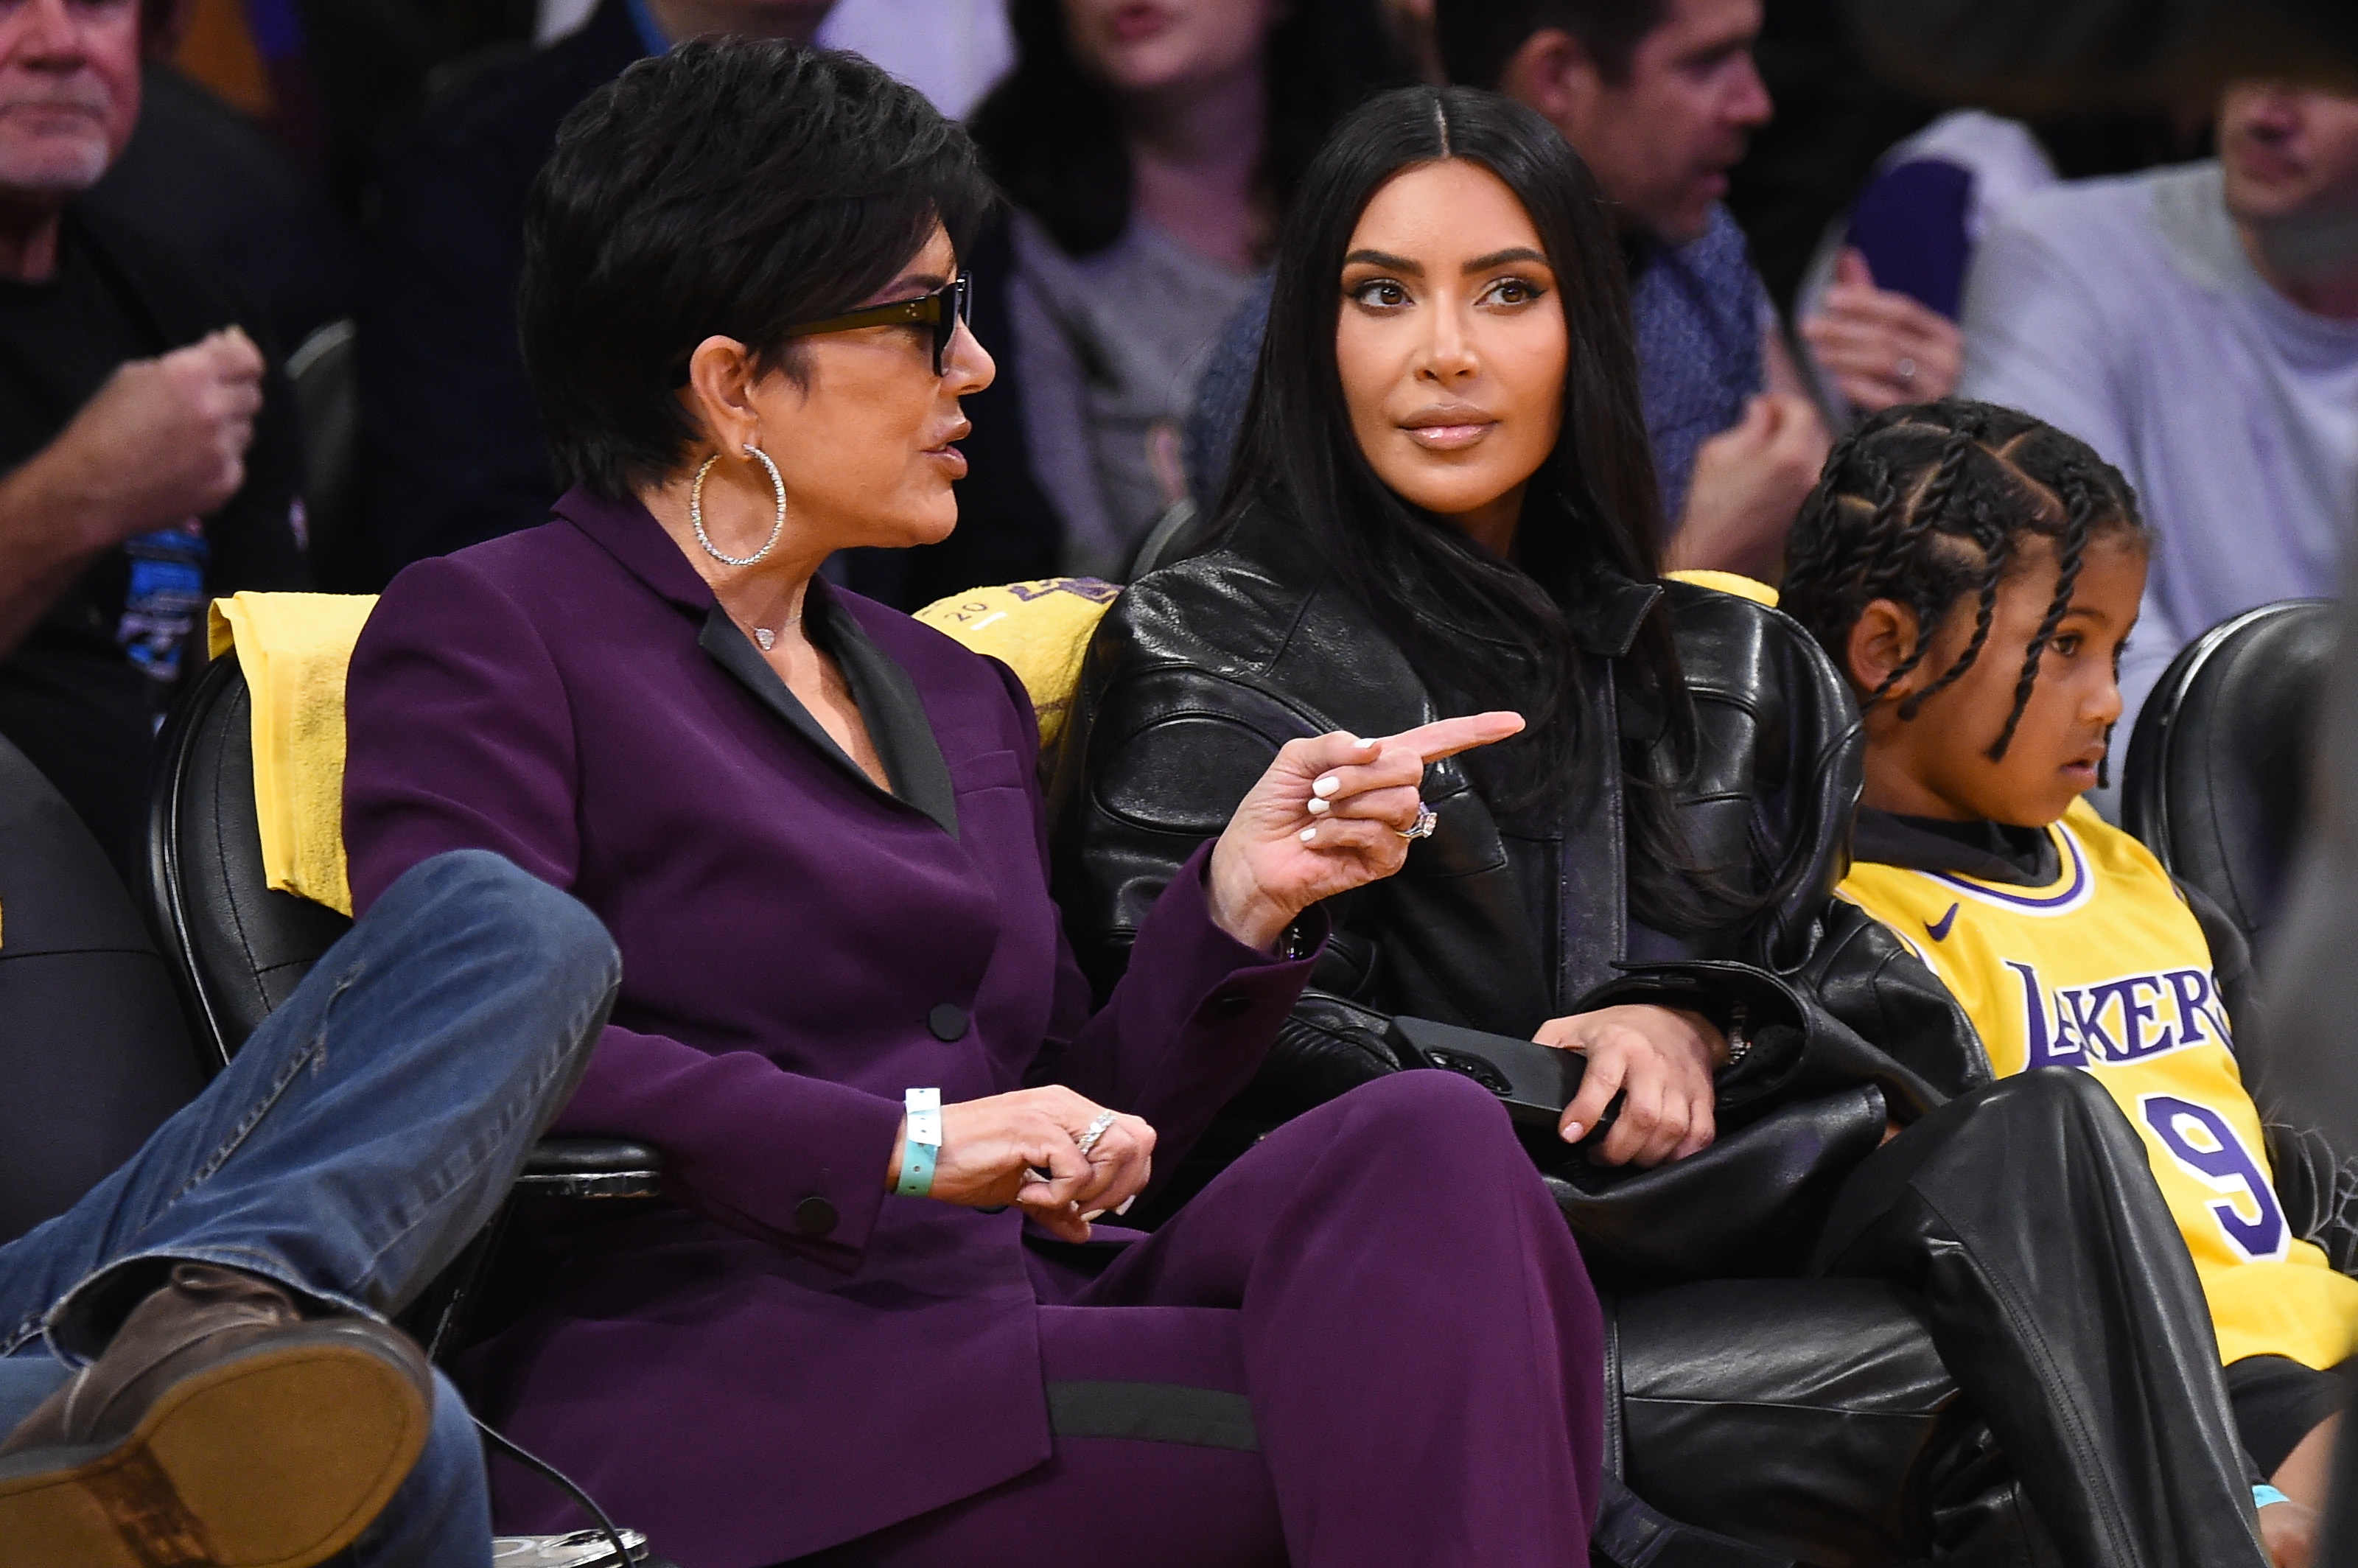 Kris and Kim with son Saint at an NBA game